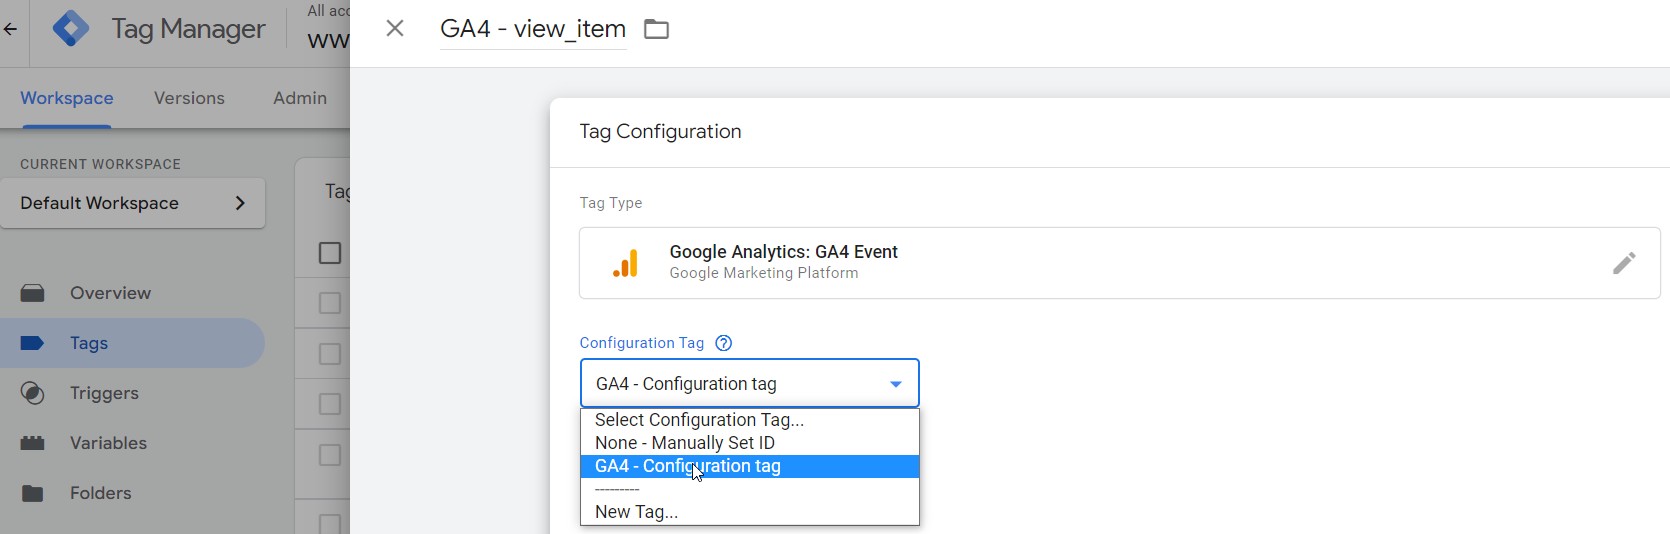 GTM configuration tag